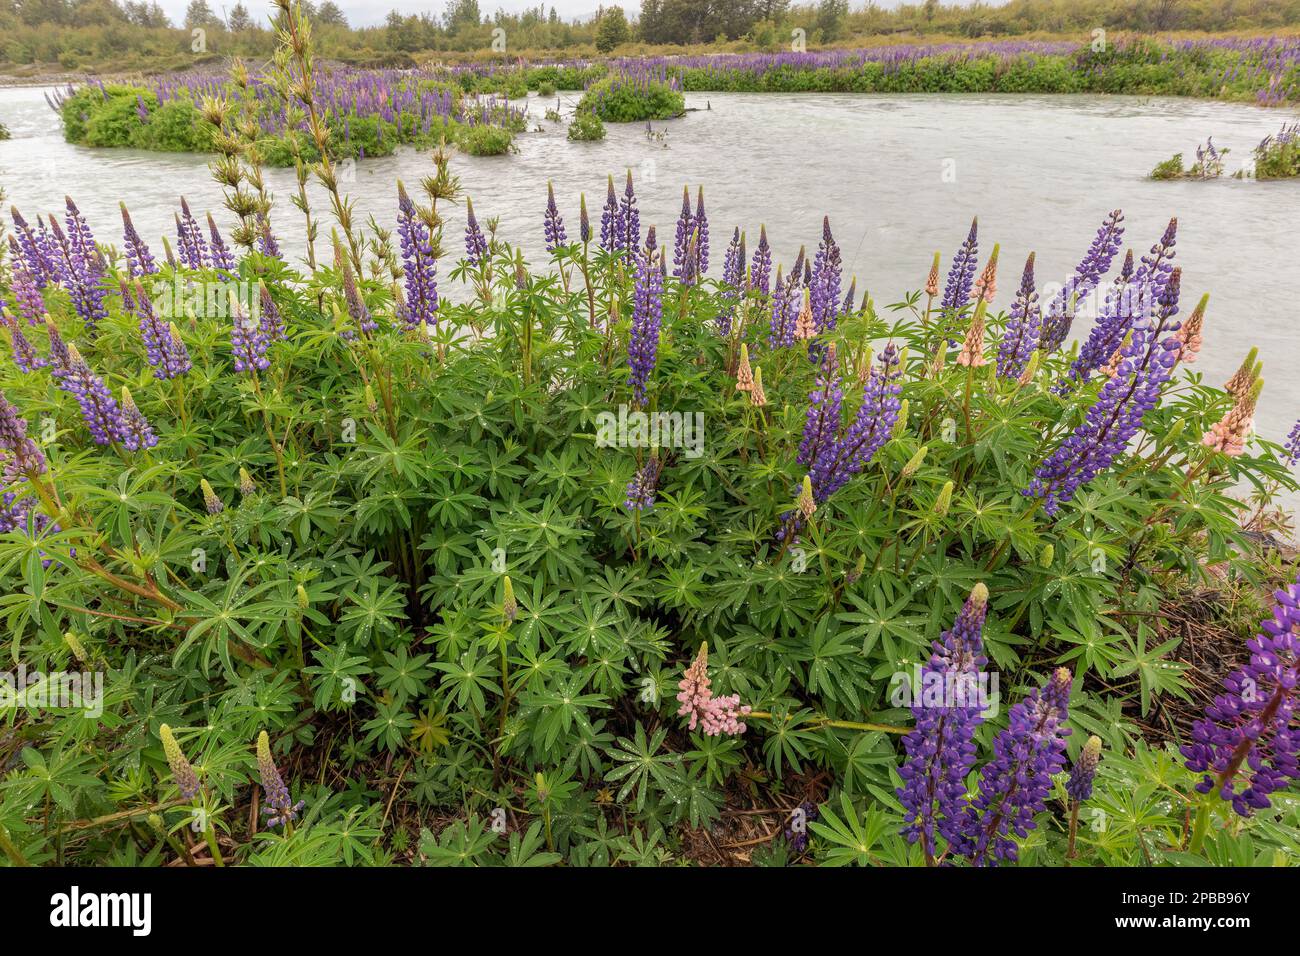 Invasive lupines have rapdily colonized river banks and gravel bars on Patagonian rivers, Rio El Canal, Carretera Austral, Patagonia Stock Photo